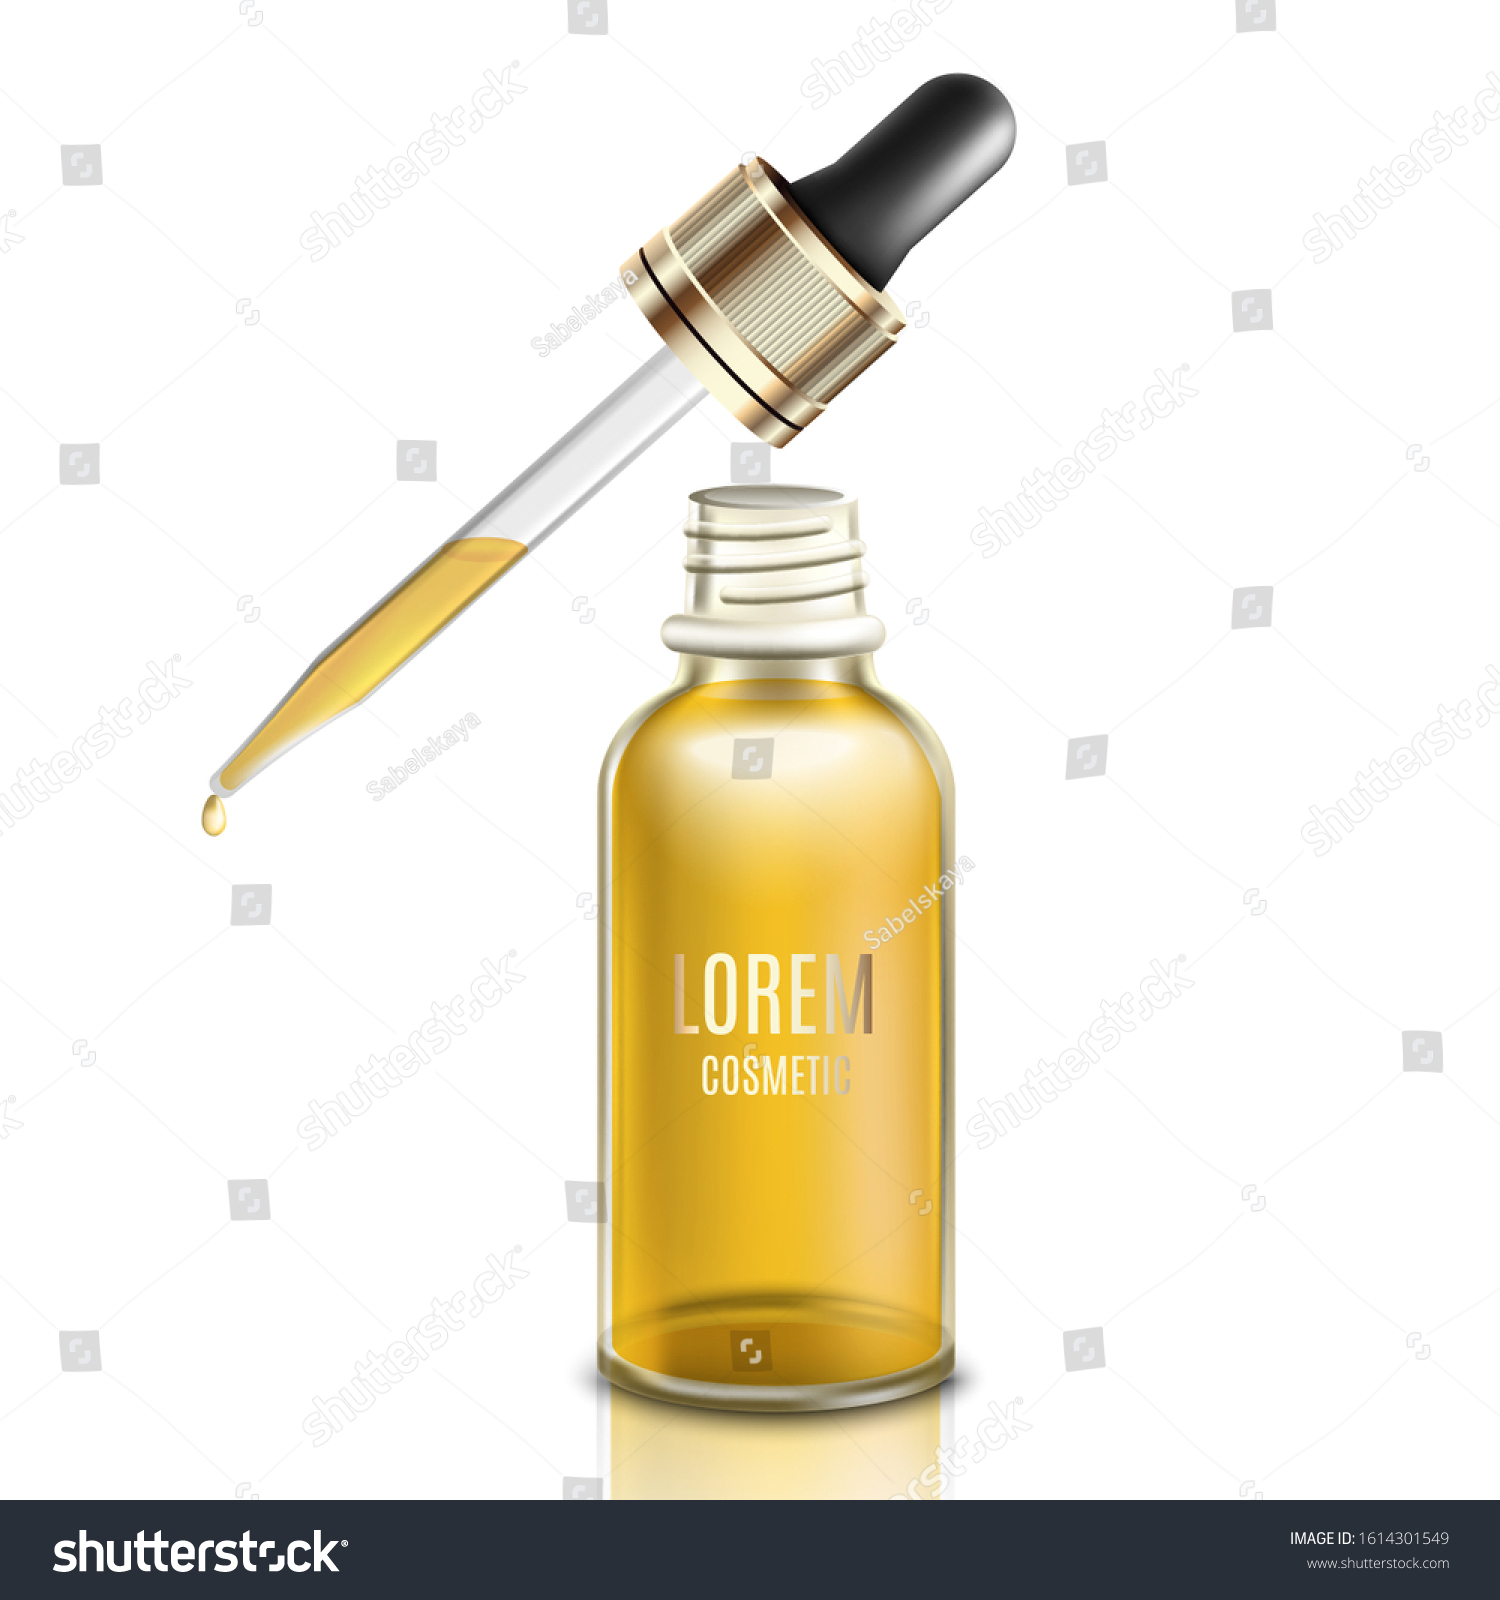 Glass dropper with golden yellow face oil or serum - realistic mockup of liquid beauty product with gold label text template. Isolated vector illustration. #1614301549